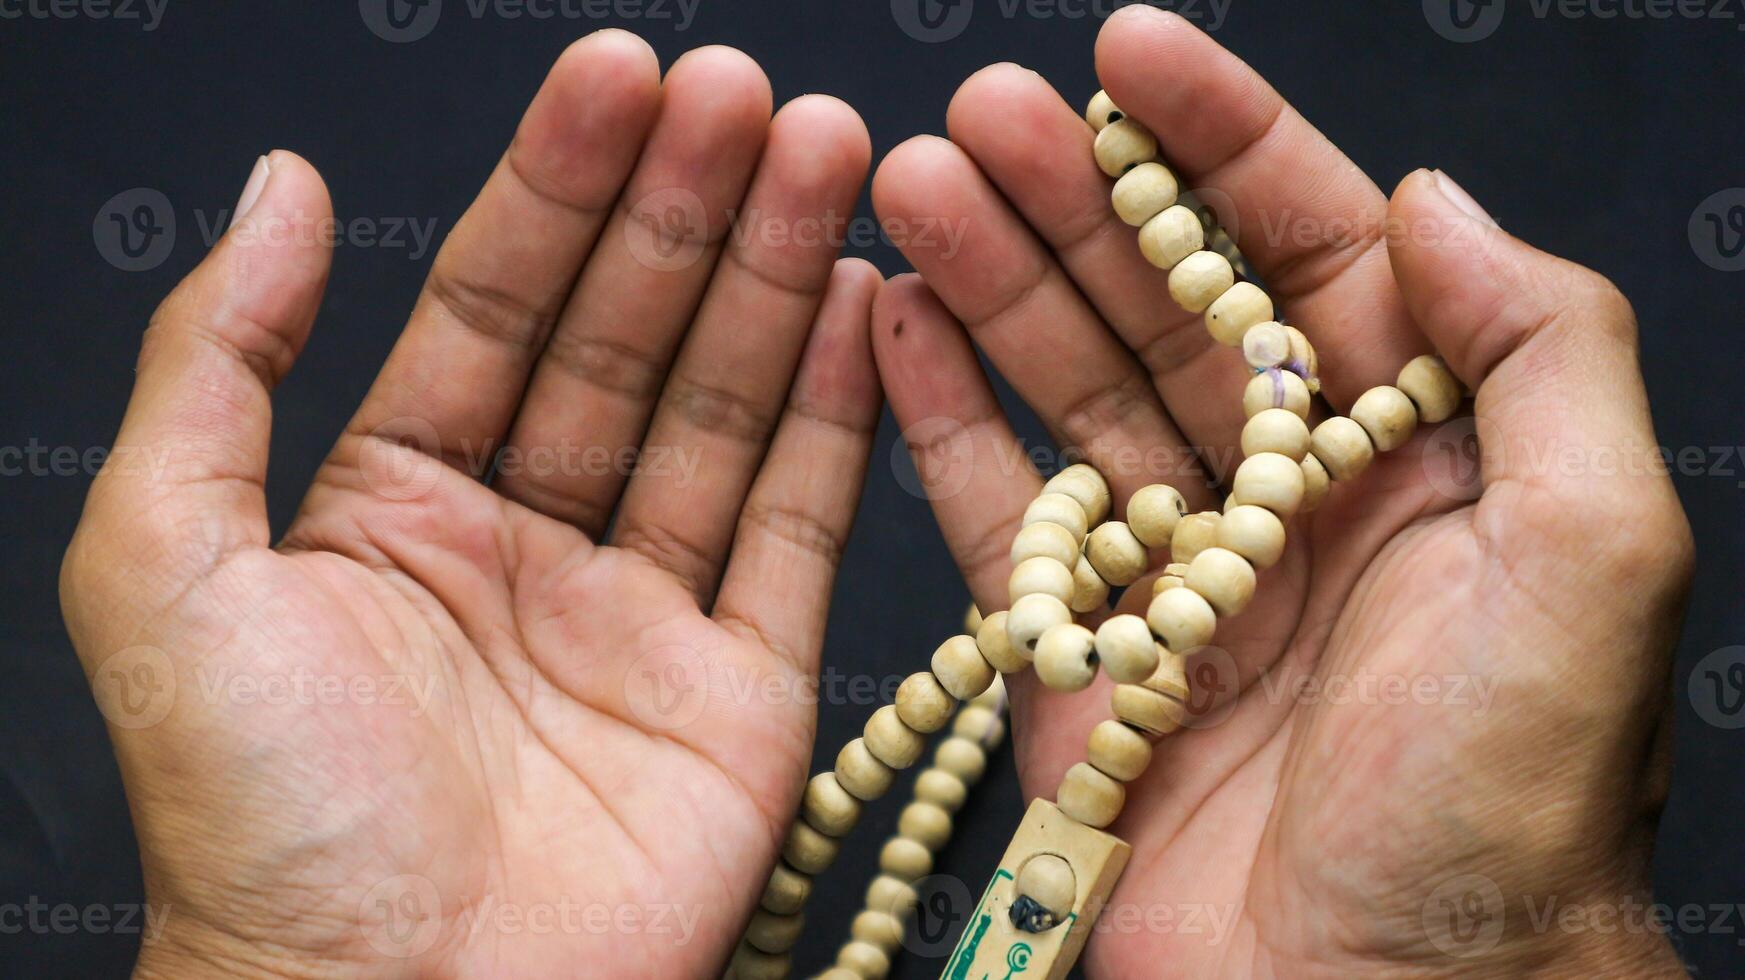 Overhead view of hands holding prayer beads with black background. photo